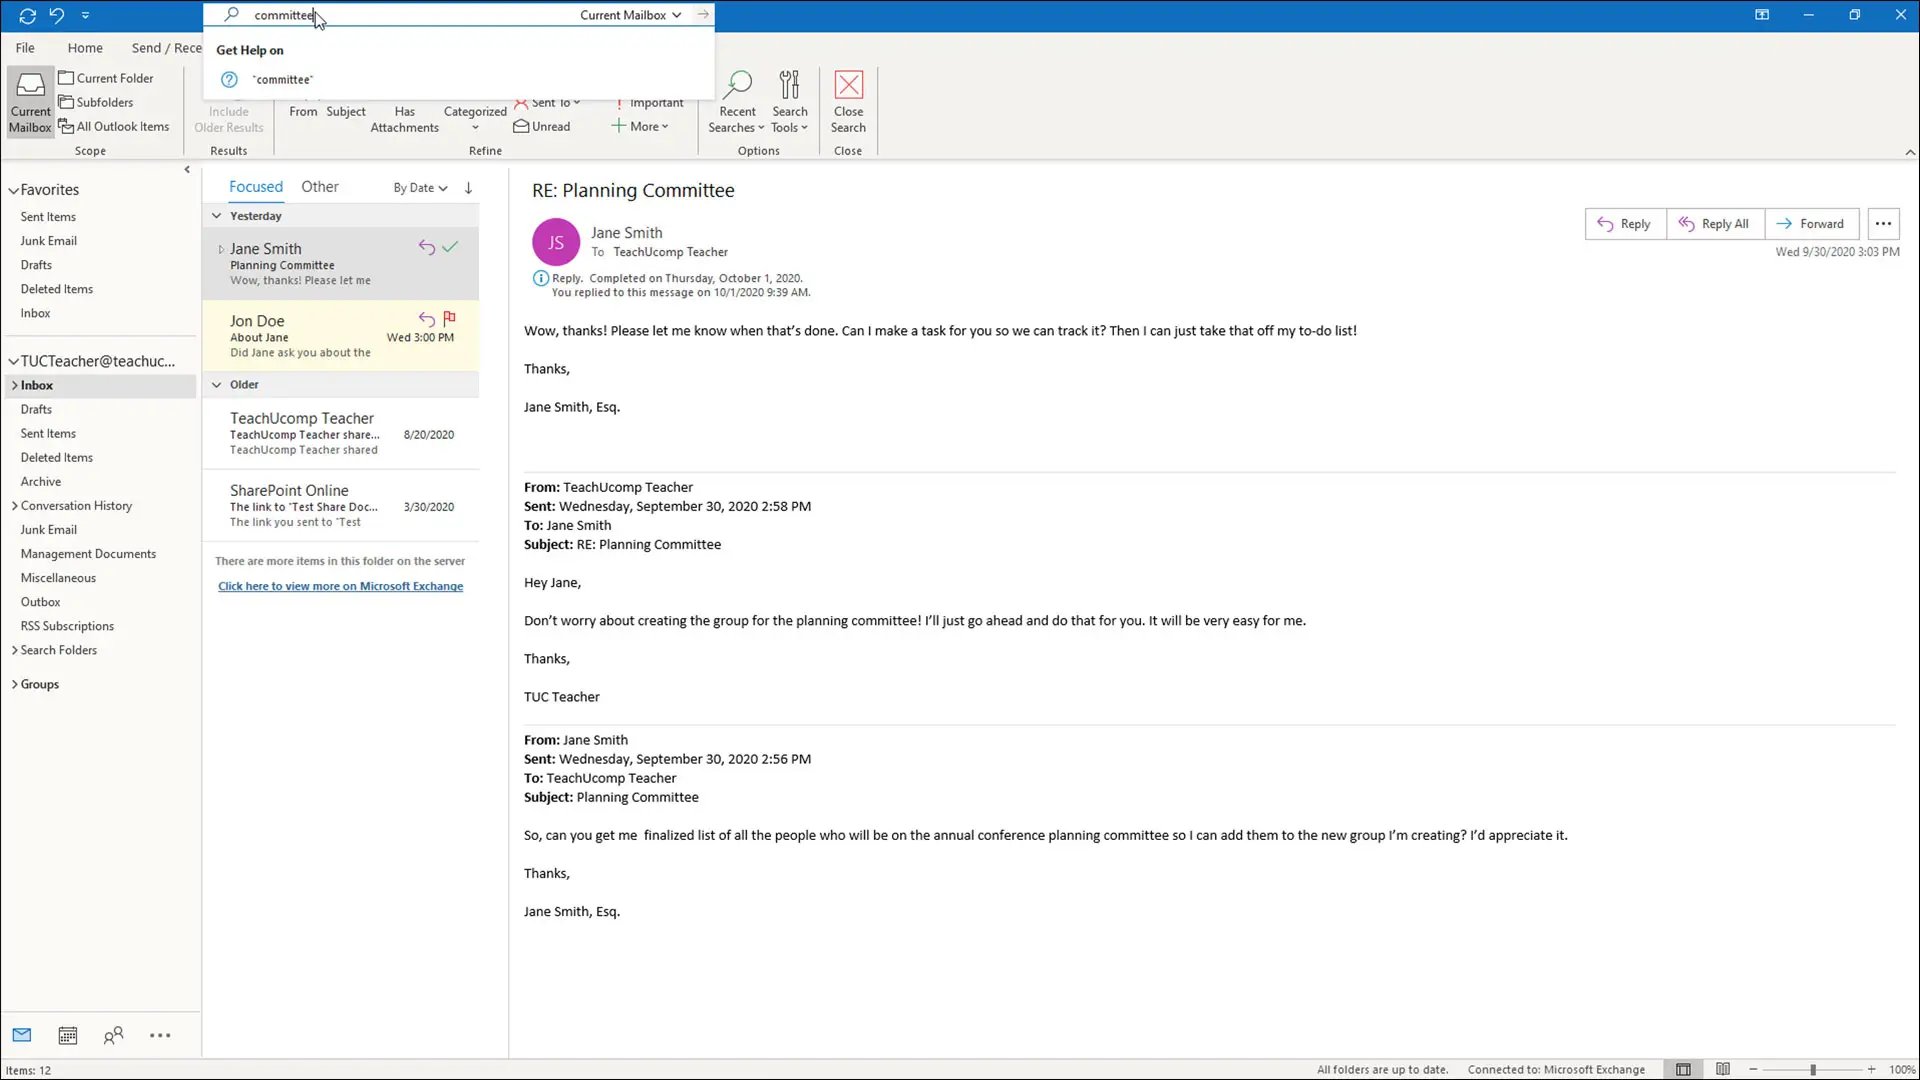 How To Sort A Mailbox In Outlook